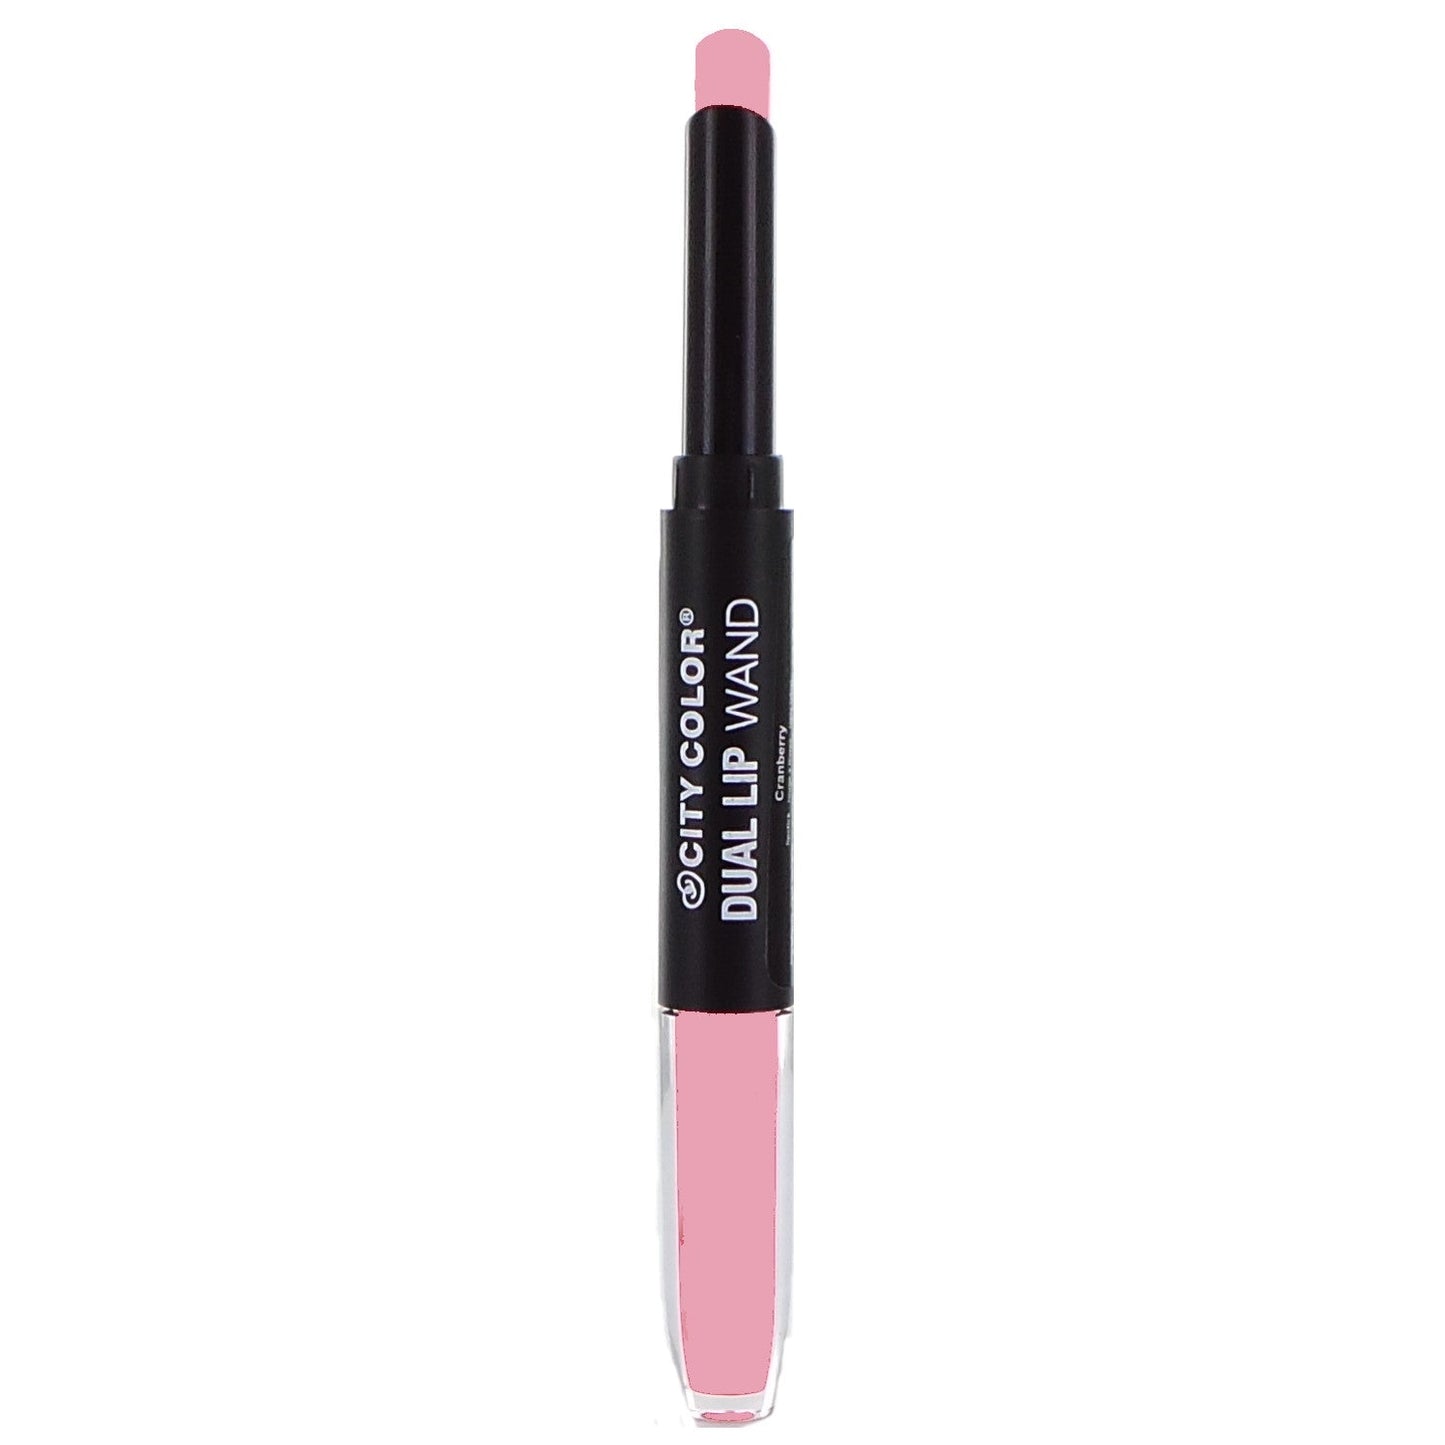 CITY COLOR Dual Lip Wand 2 in 1 Lipstik and Lip Gloss - CITY COLOR